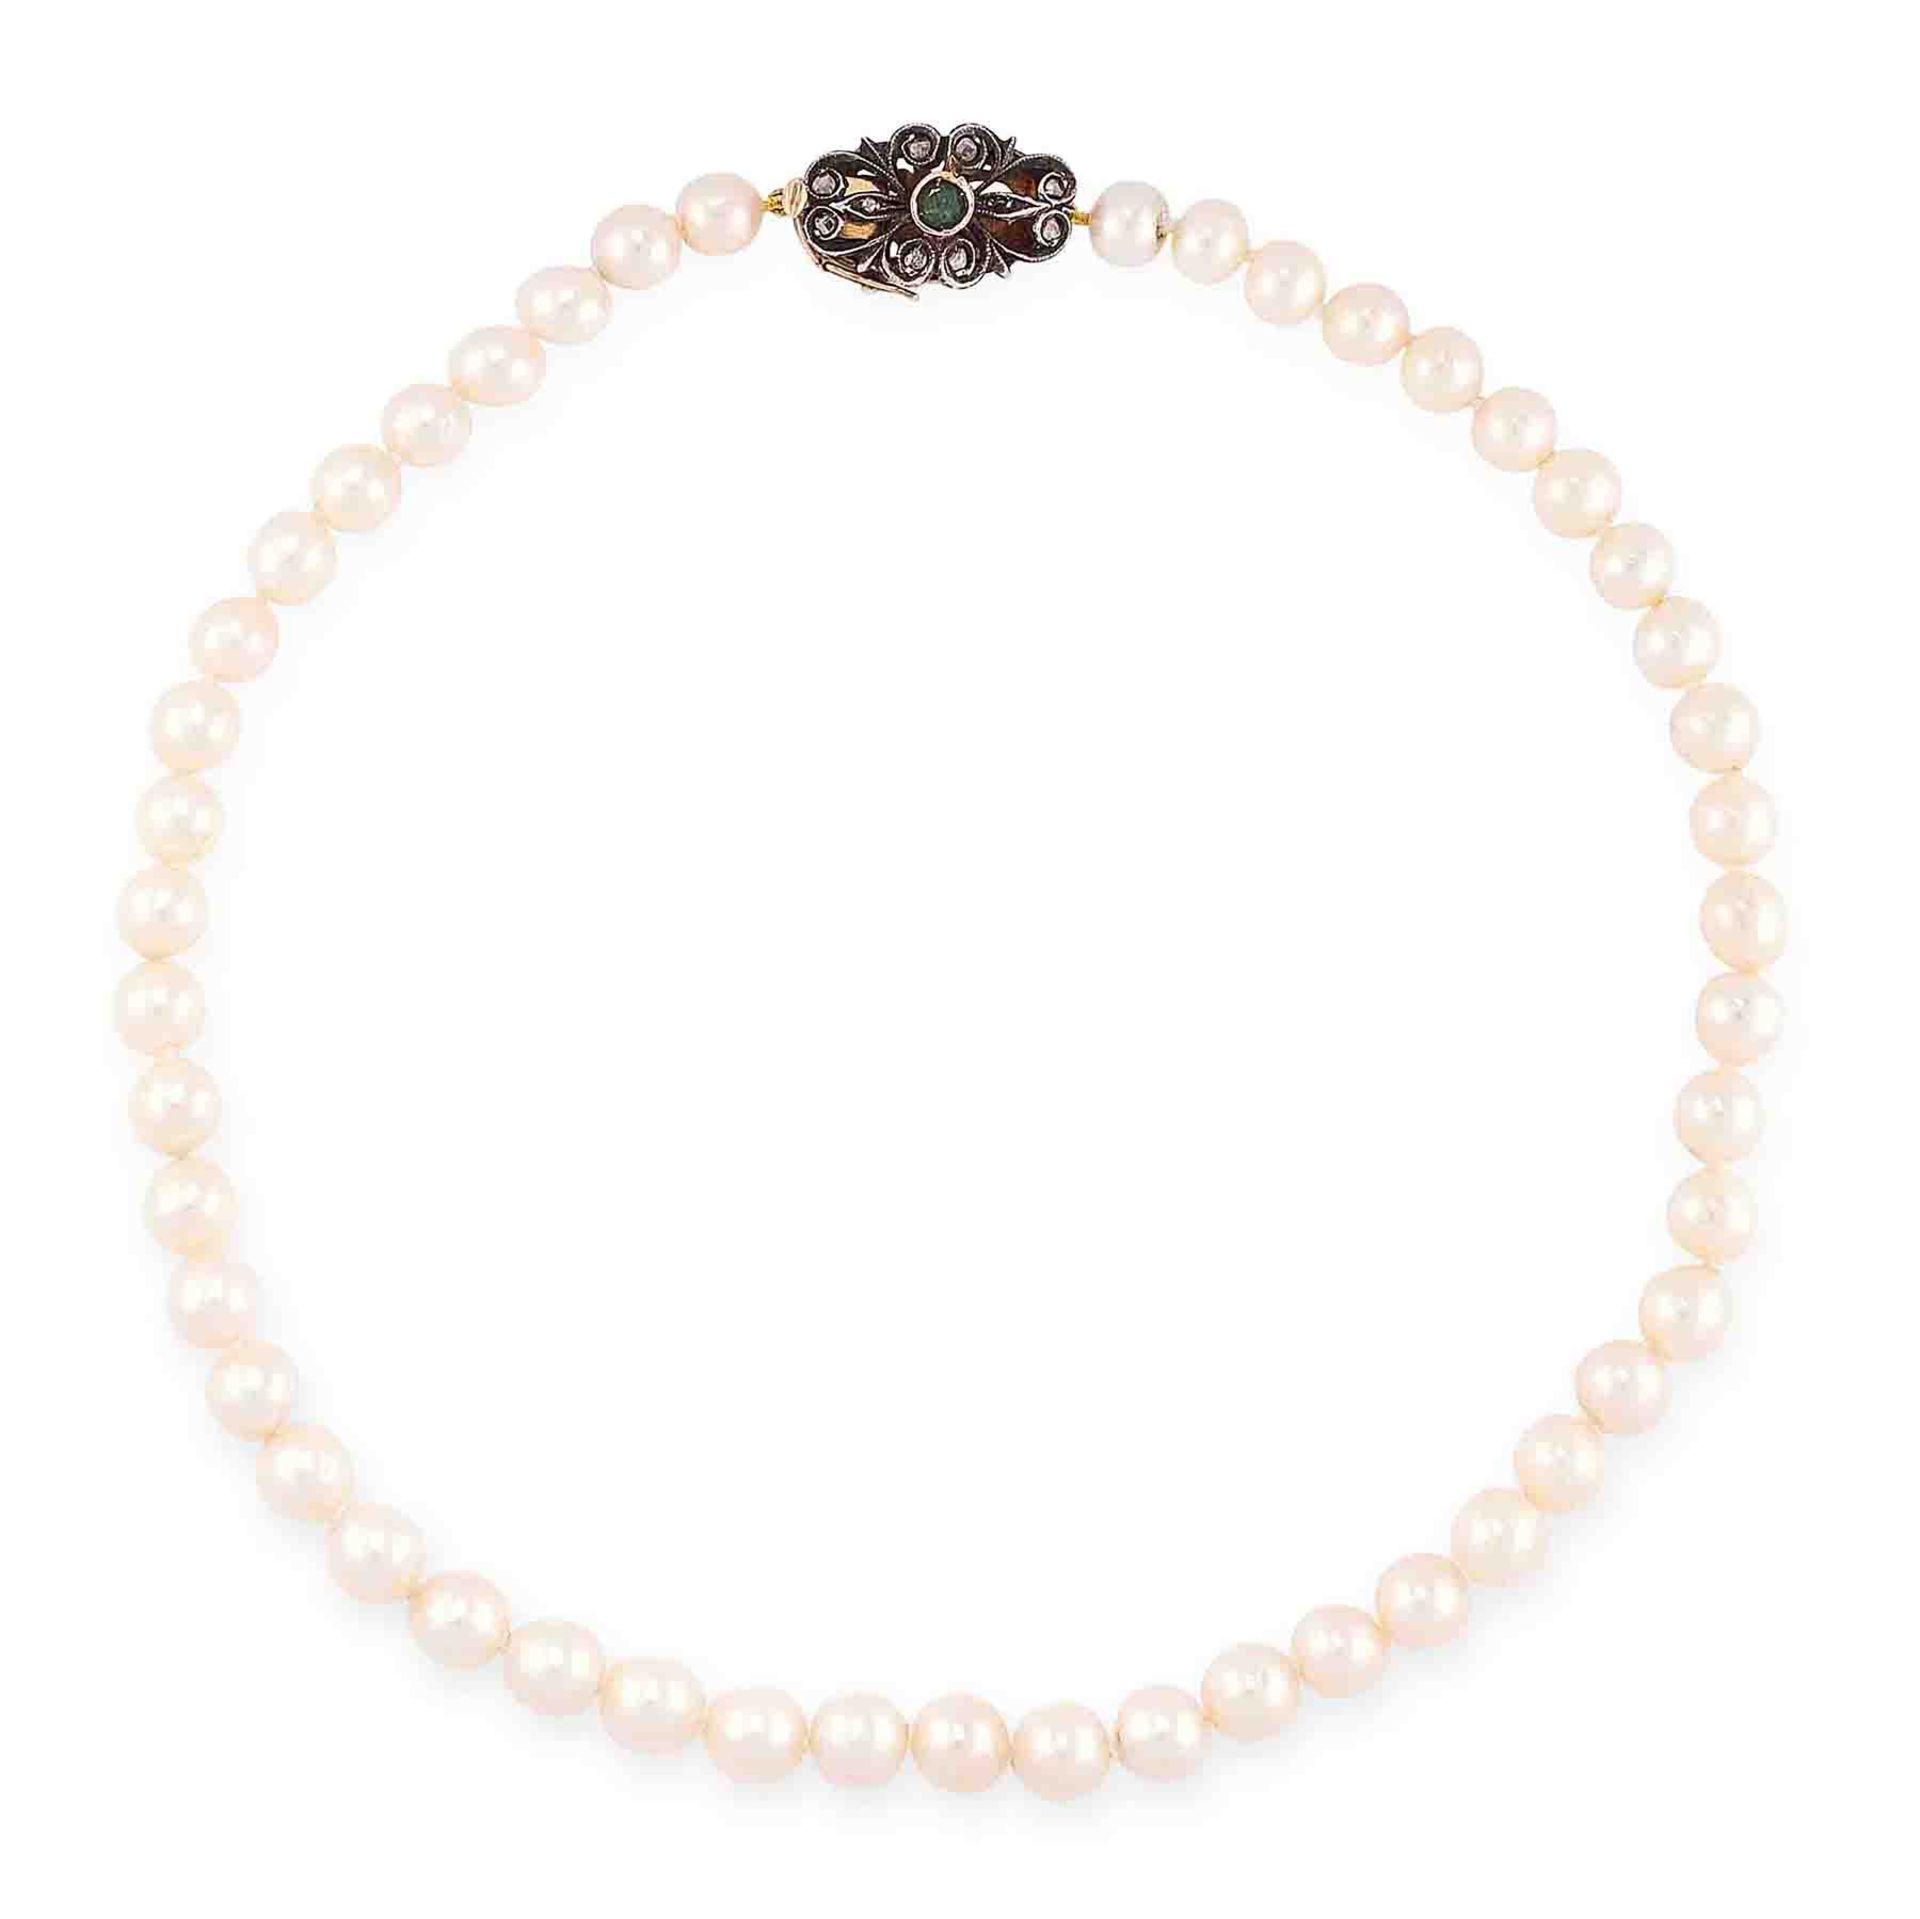 A PEARL NECKLACE in yellow gold and silver, comprising of a single row of pearls, set on an